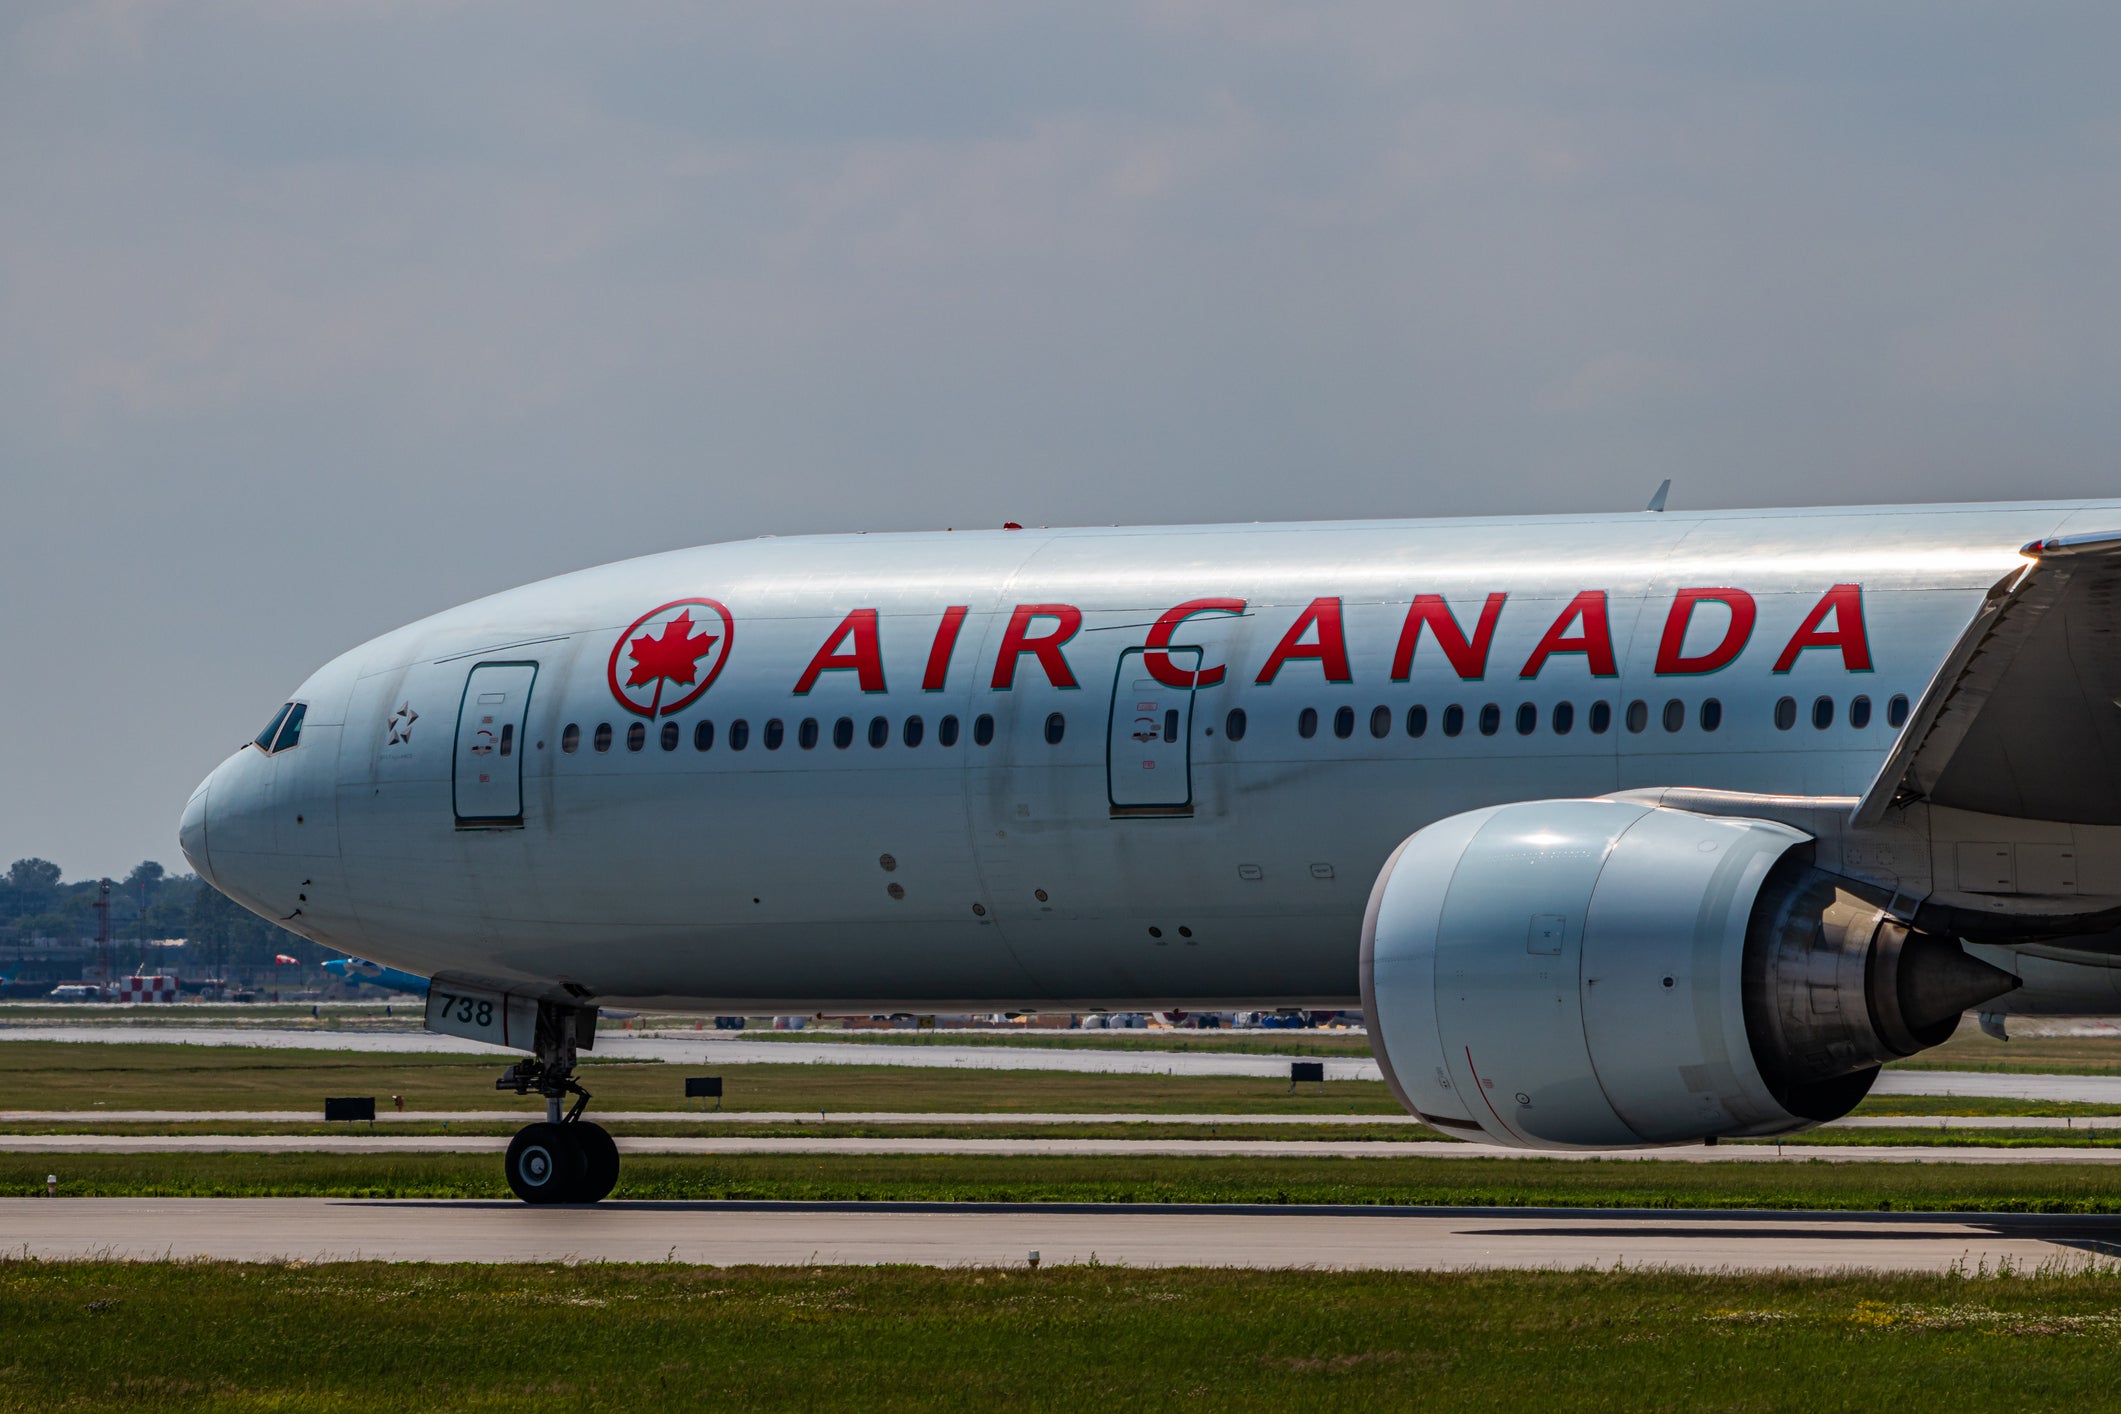 Air Canada is subject to Canada’s Official Languages Act